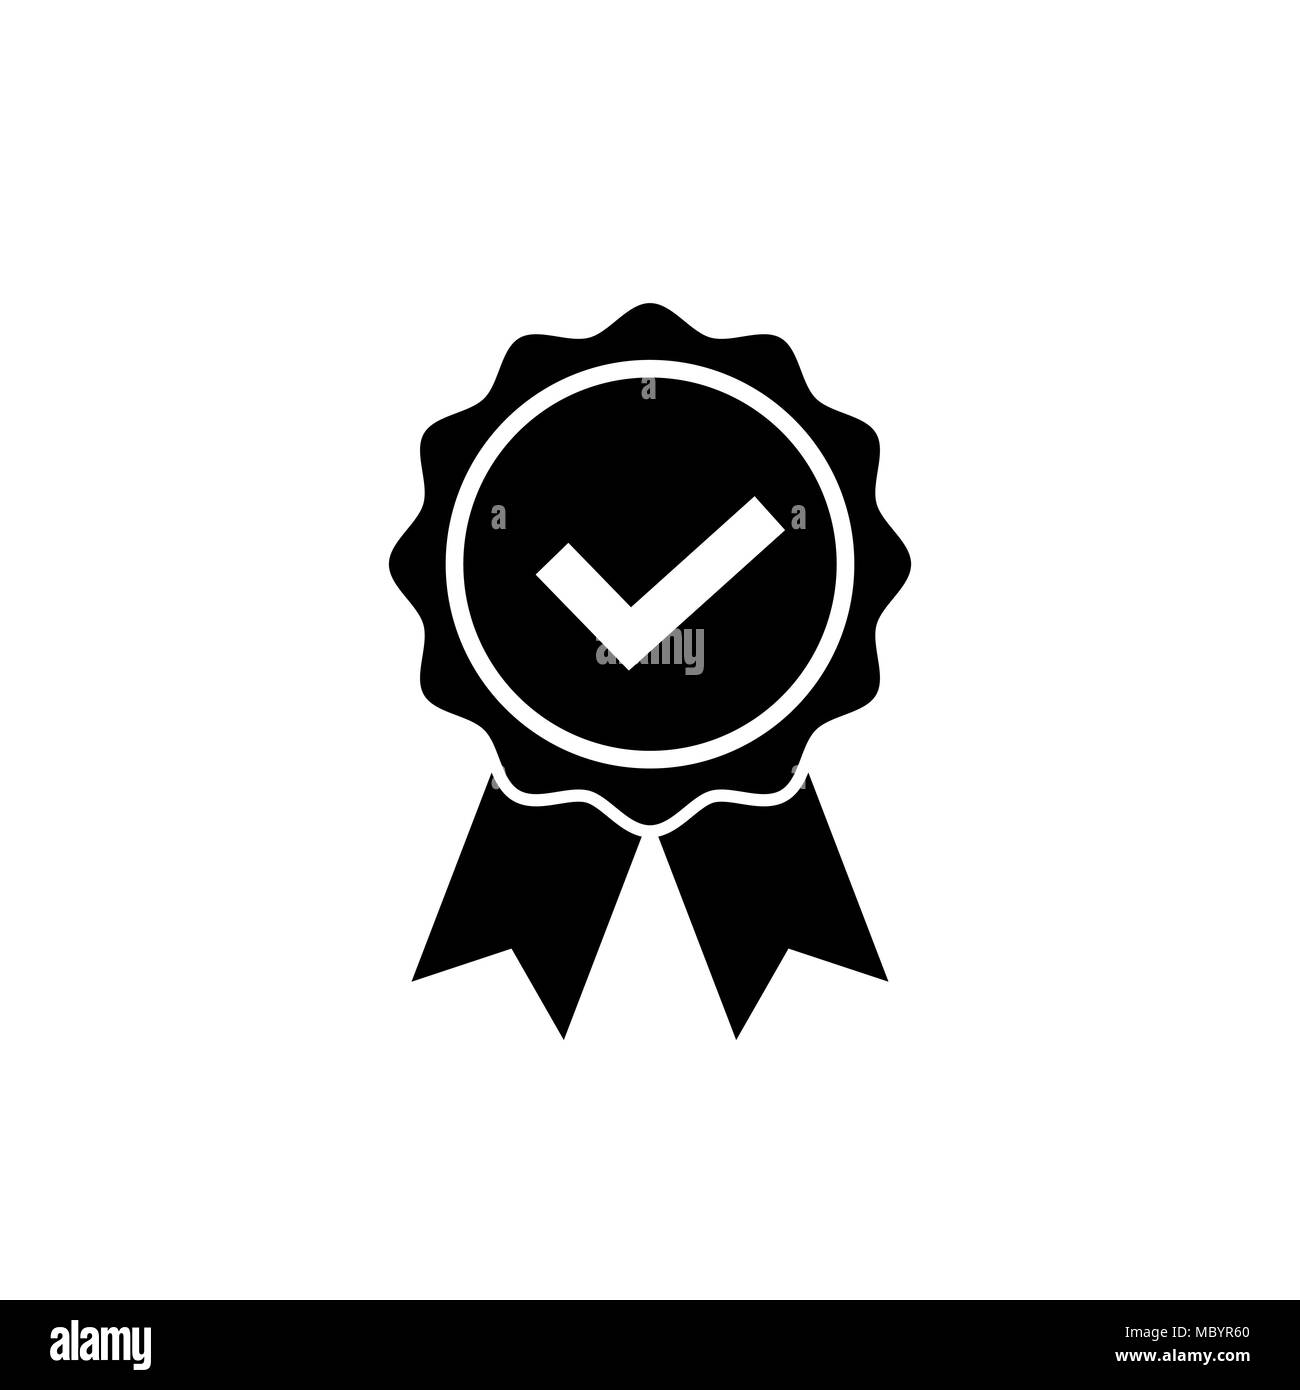 Approved or certified medal icon. Award symbol Stock Vector